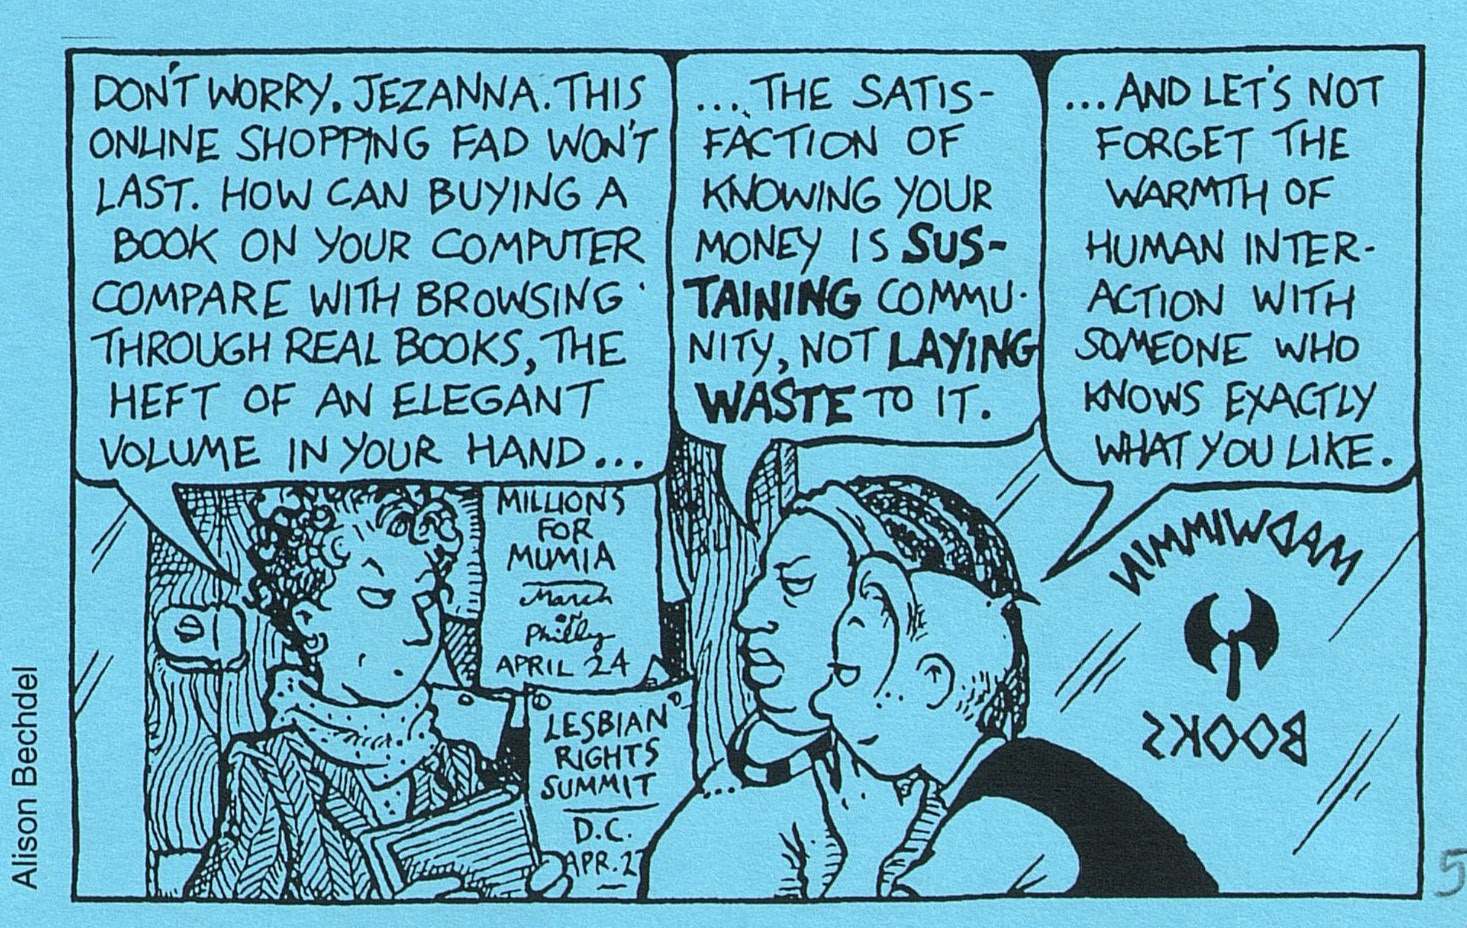 one panel of a comic strip by Alison Bechdel on the cover of FBN three women discuss why customers will prefer brick and mortar bookstores to online shopping